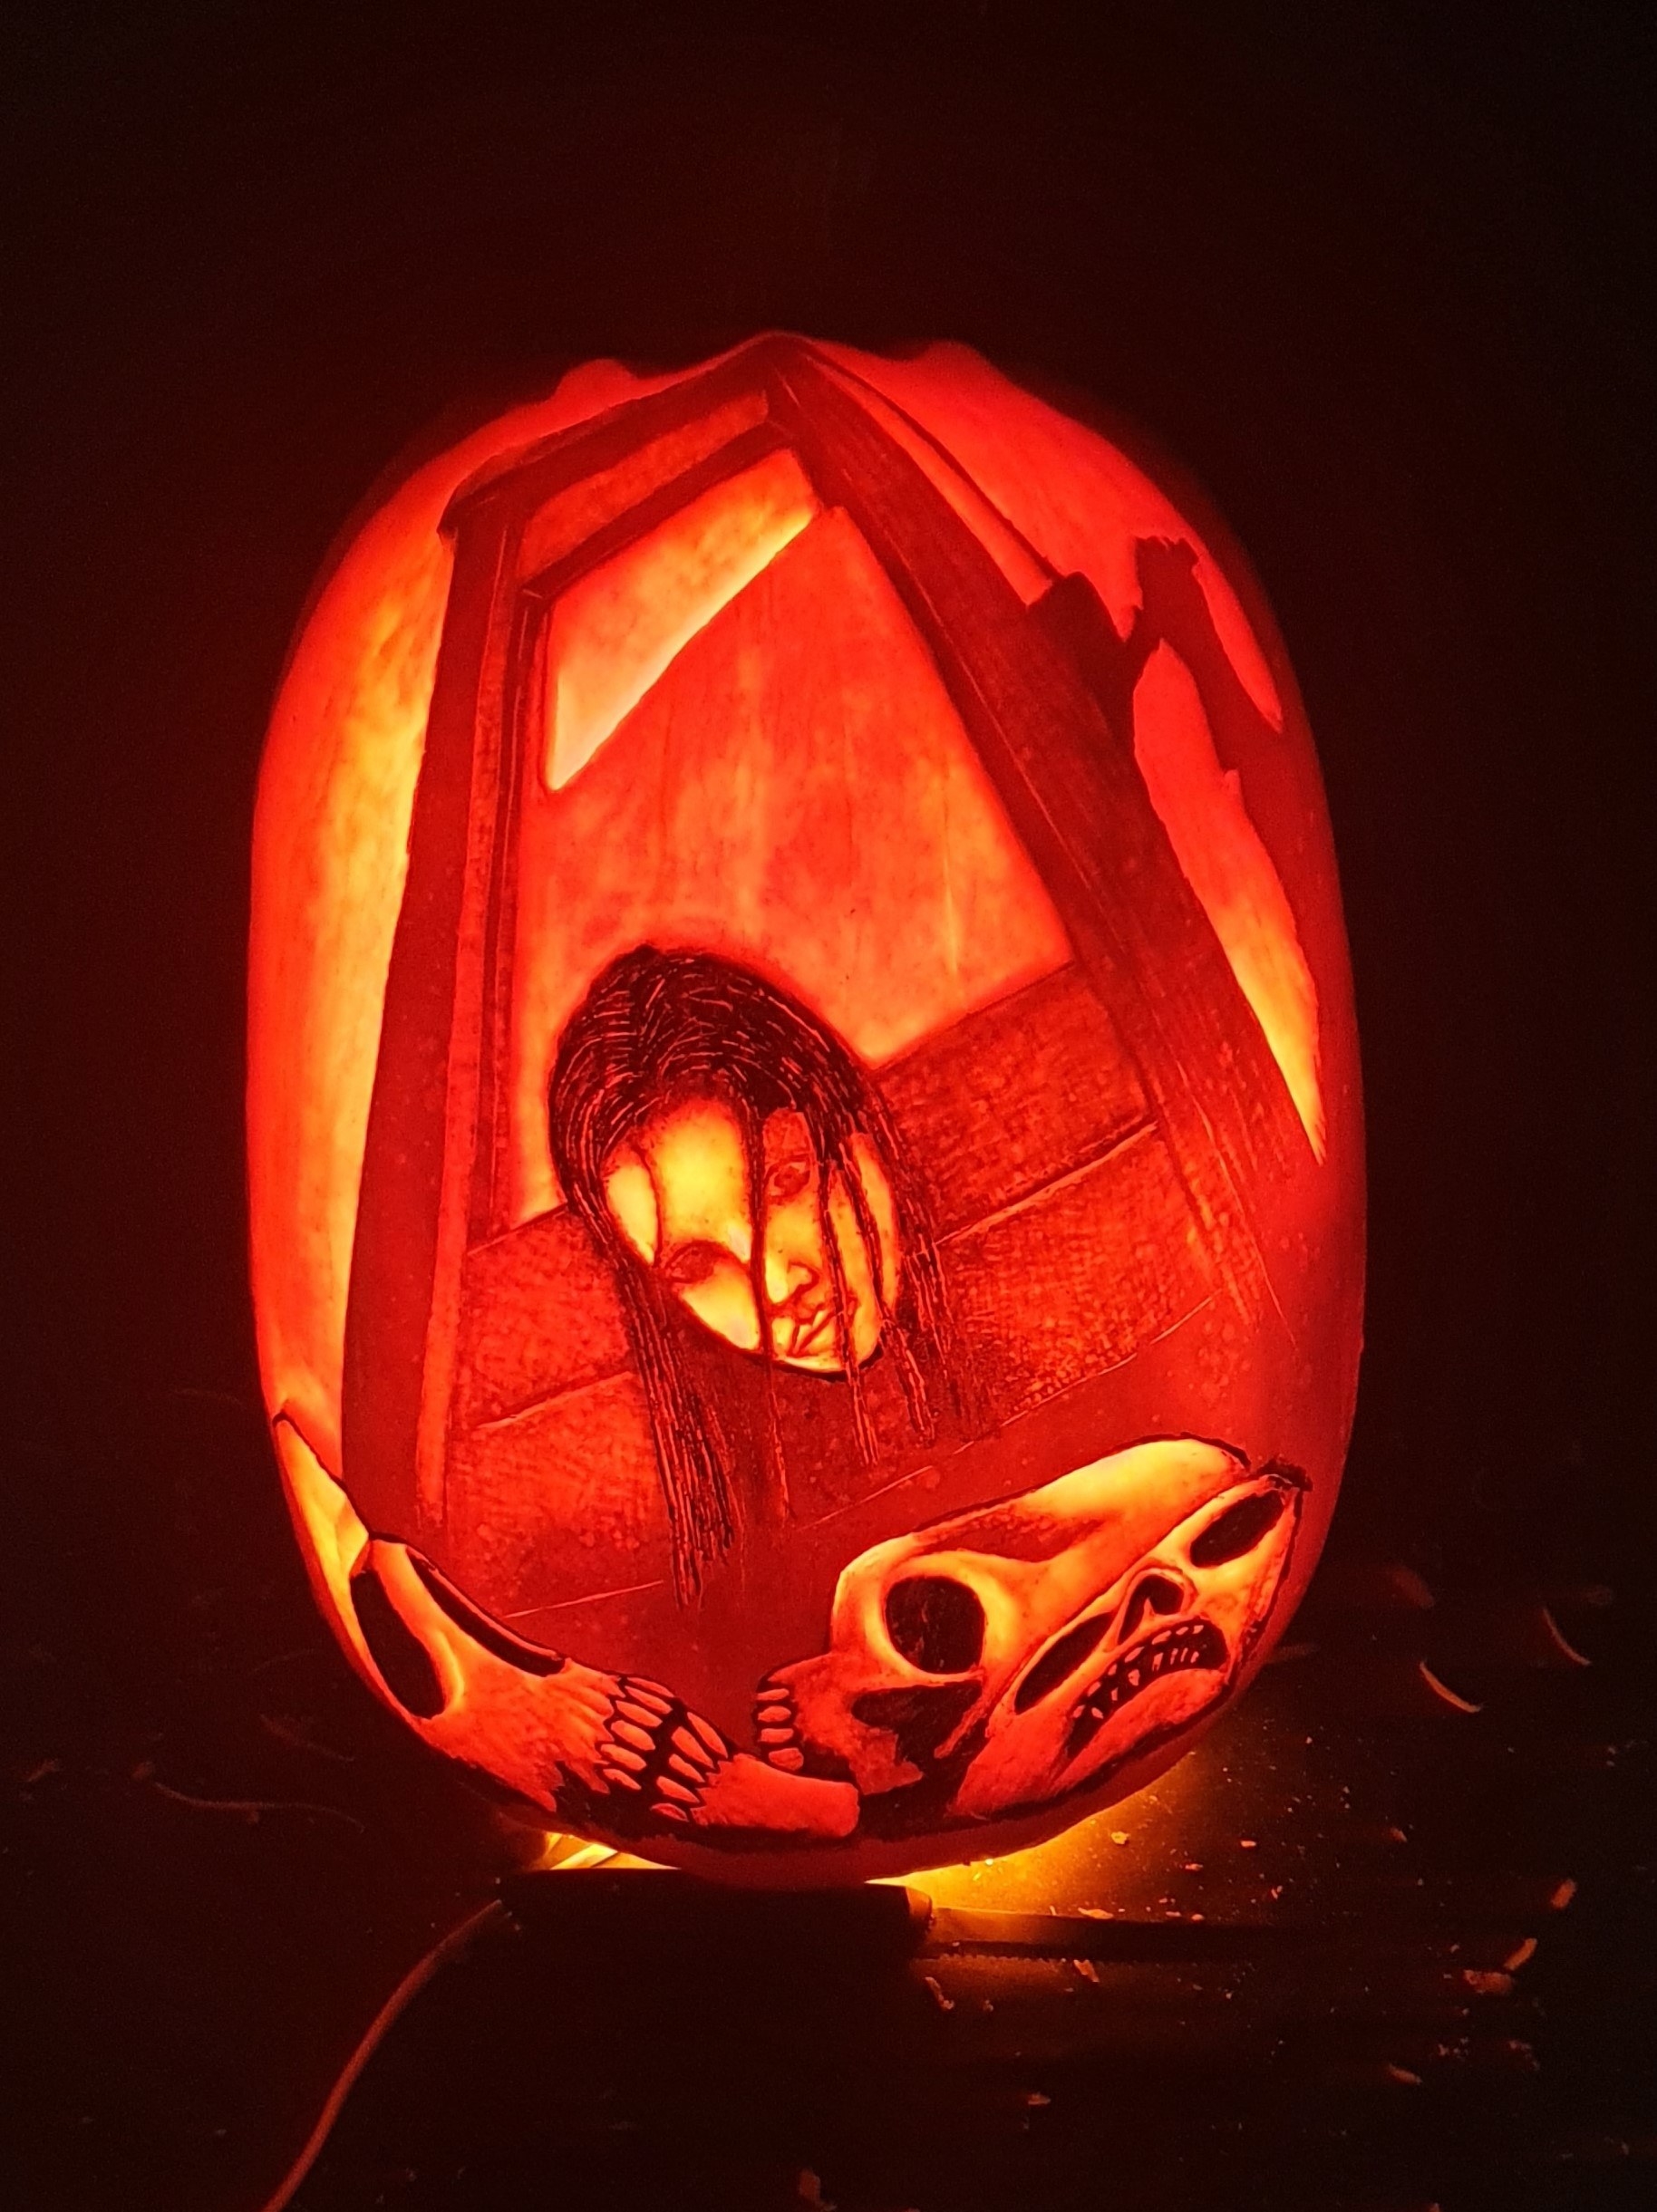 A woman at a guillotine carved on a pumpkin